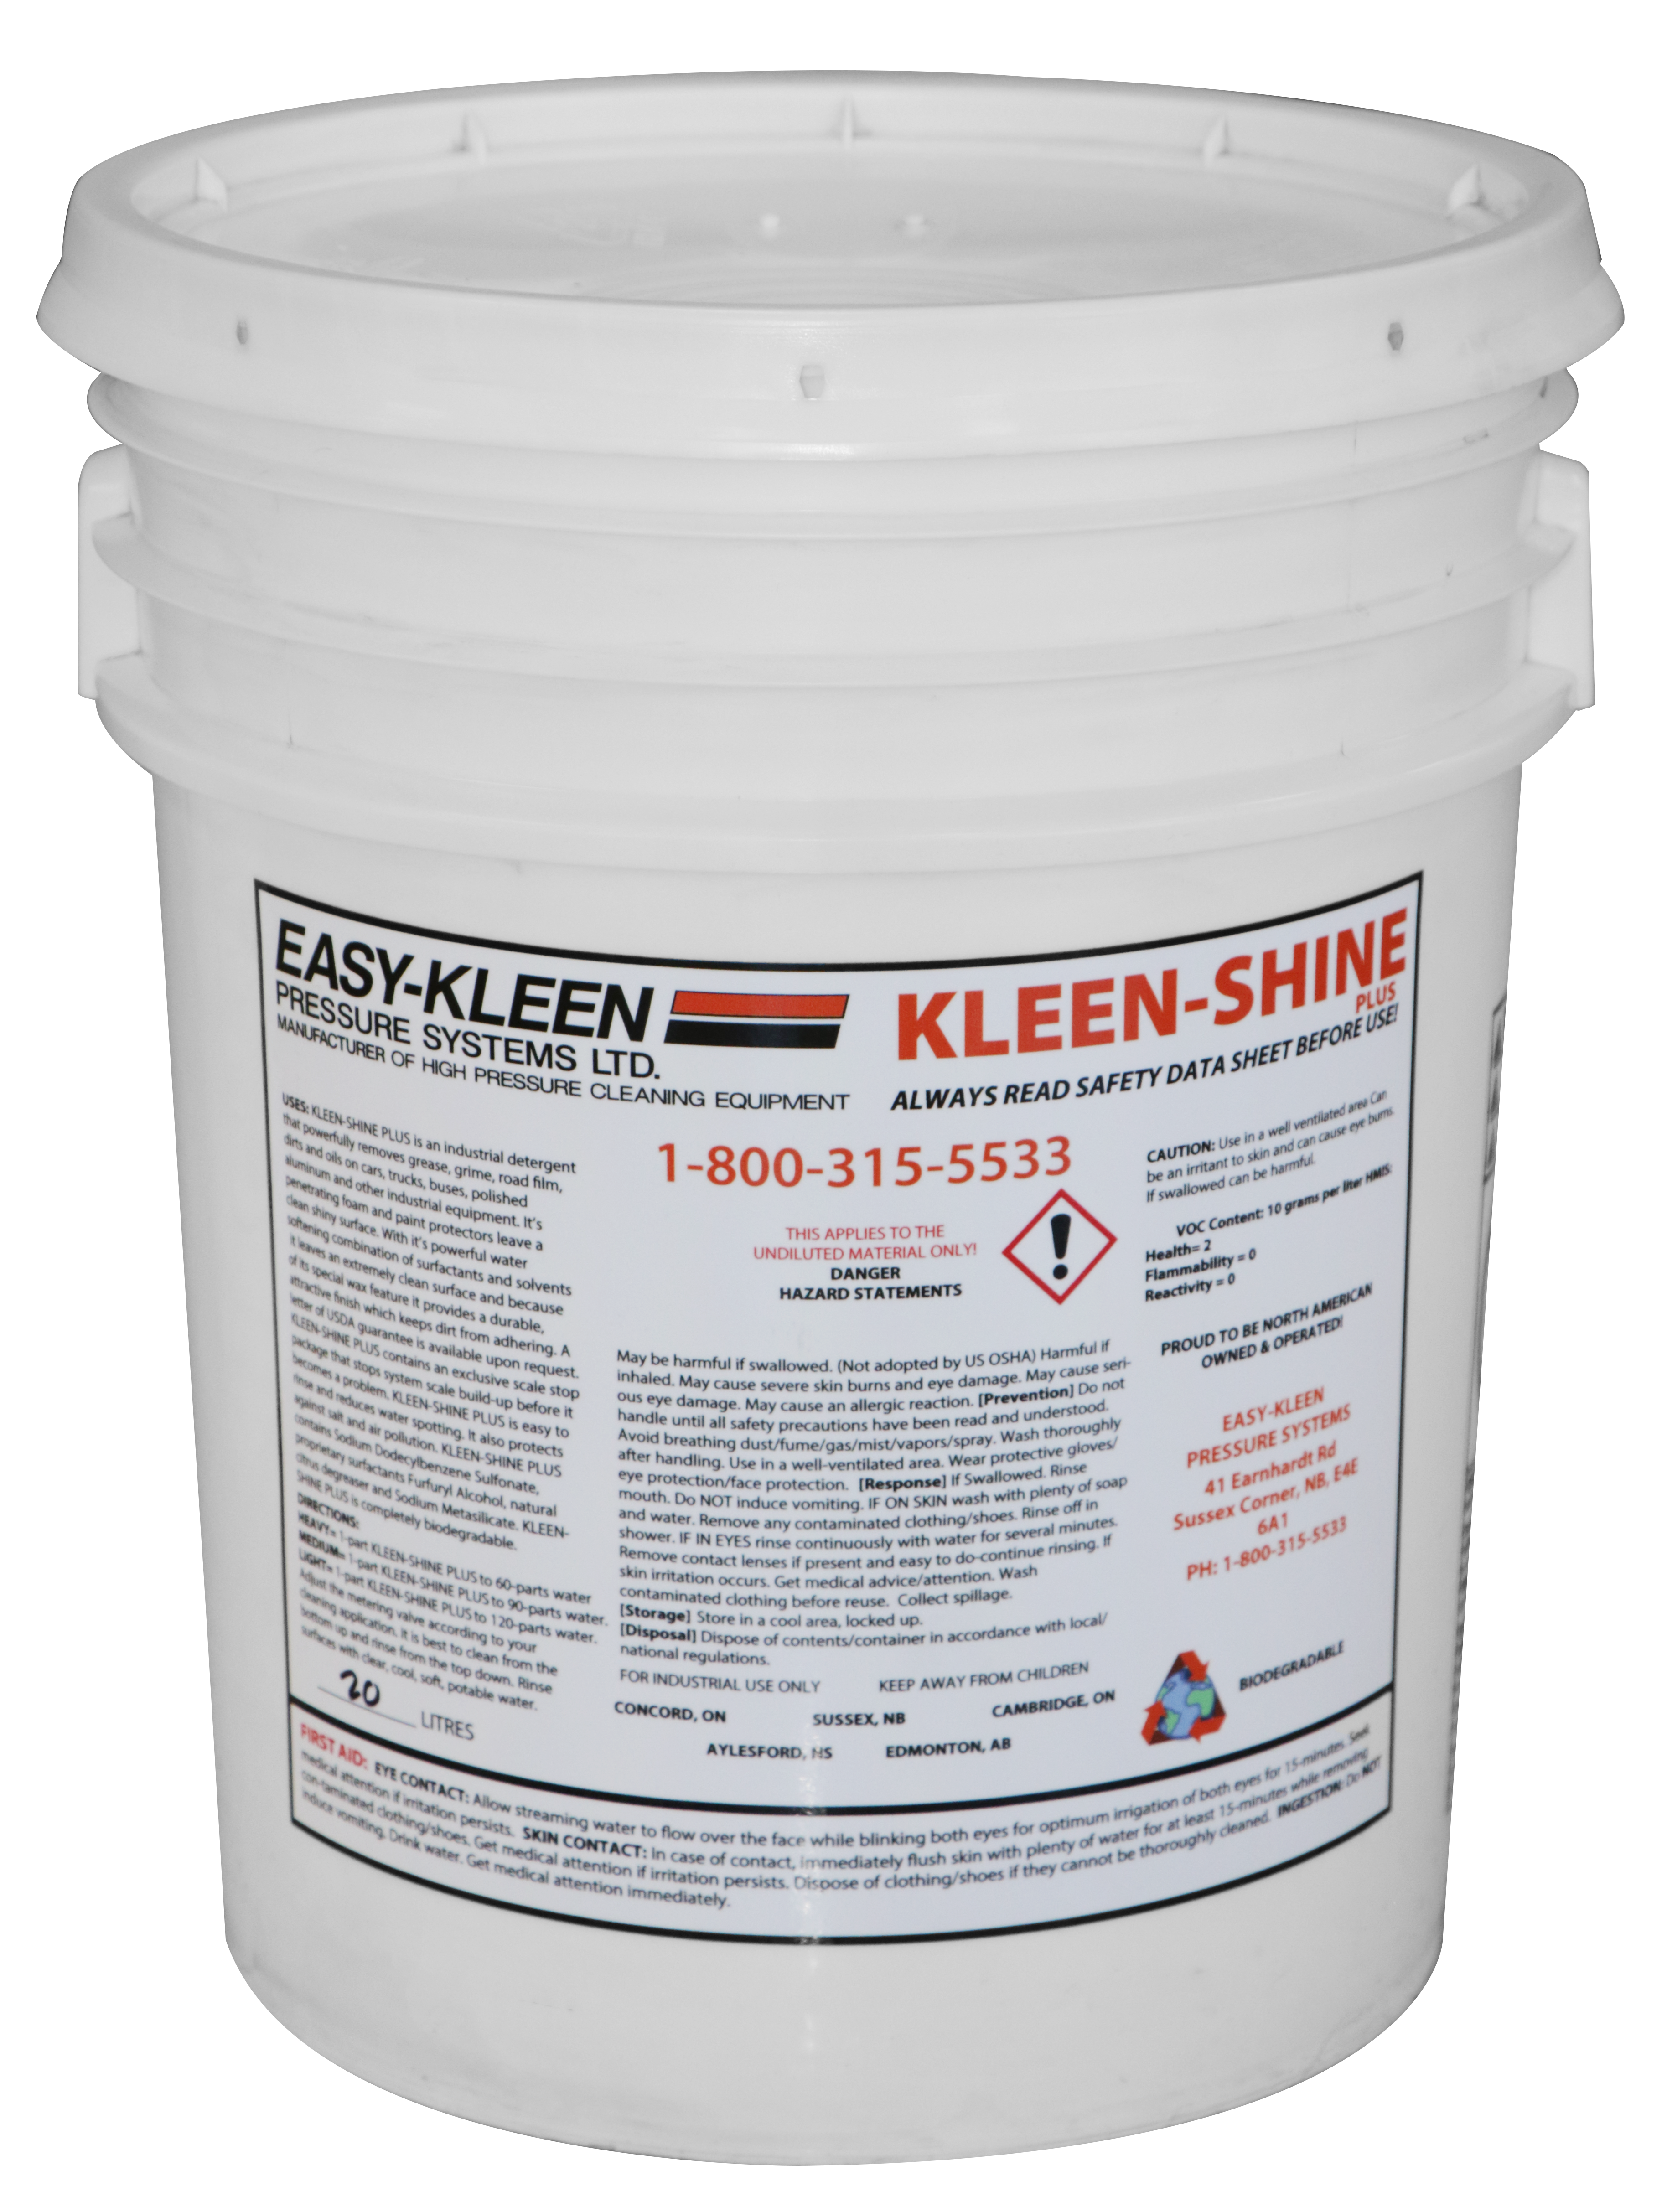 NEW KLEEN CHEMICALS! - PRESSURE WASHER CHEMICALS